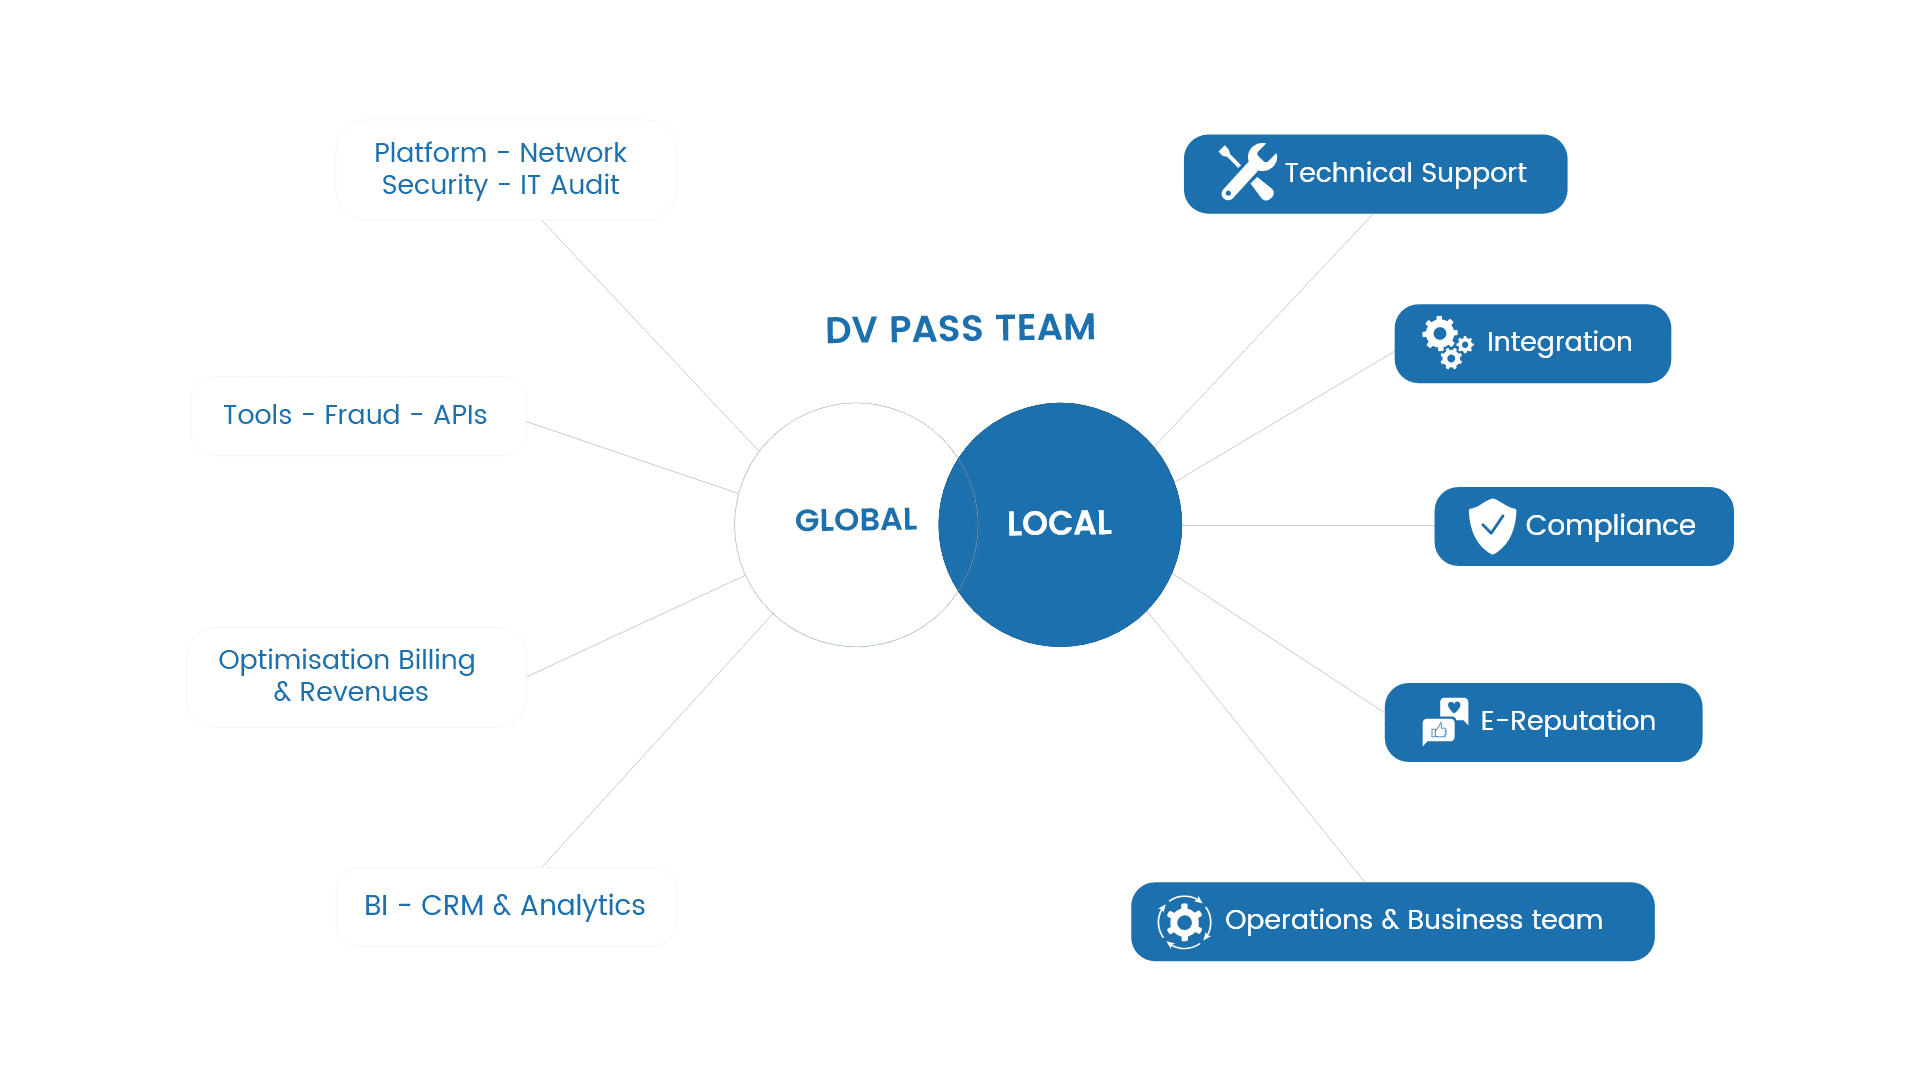 Organization chart showing merge between global and local